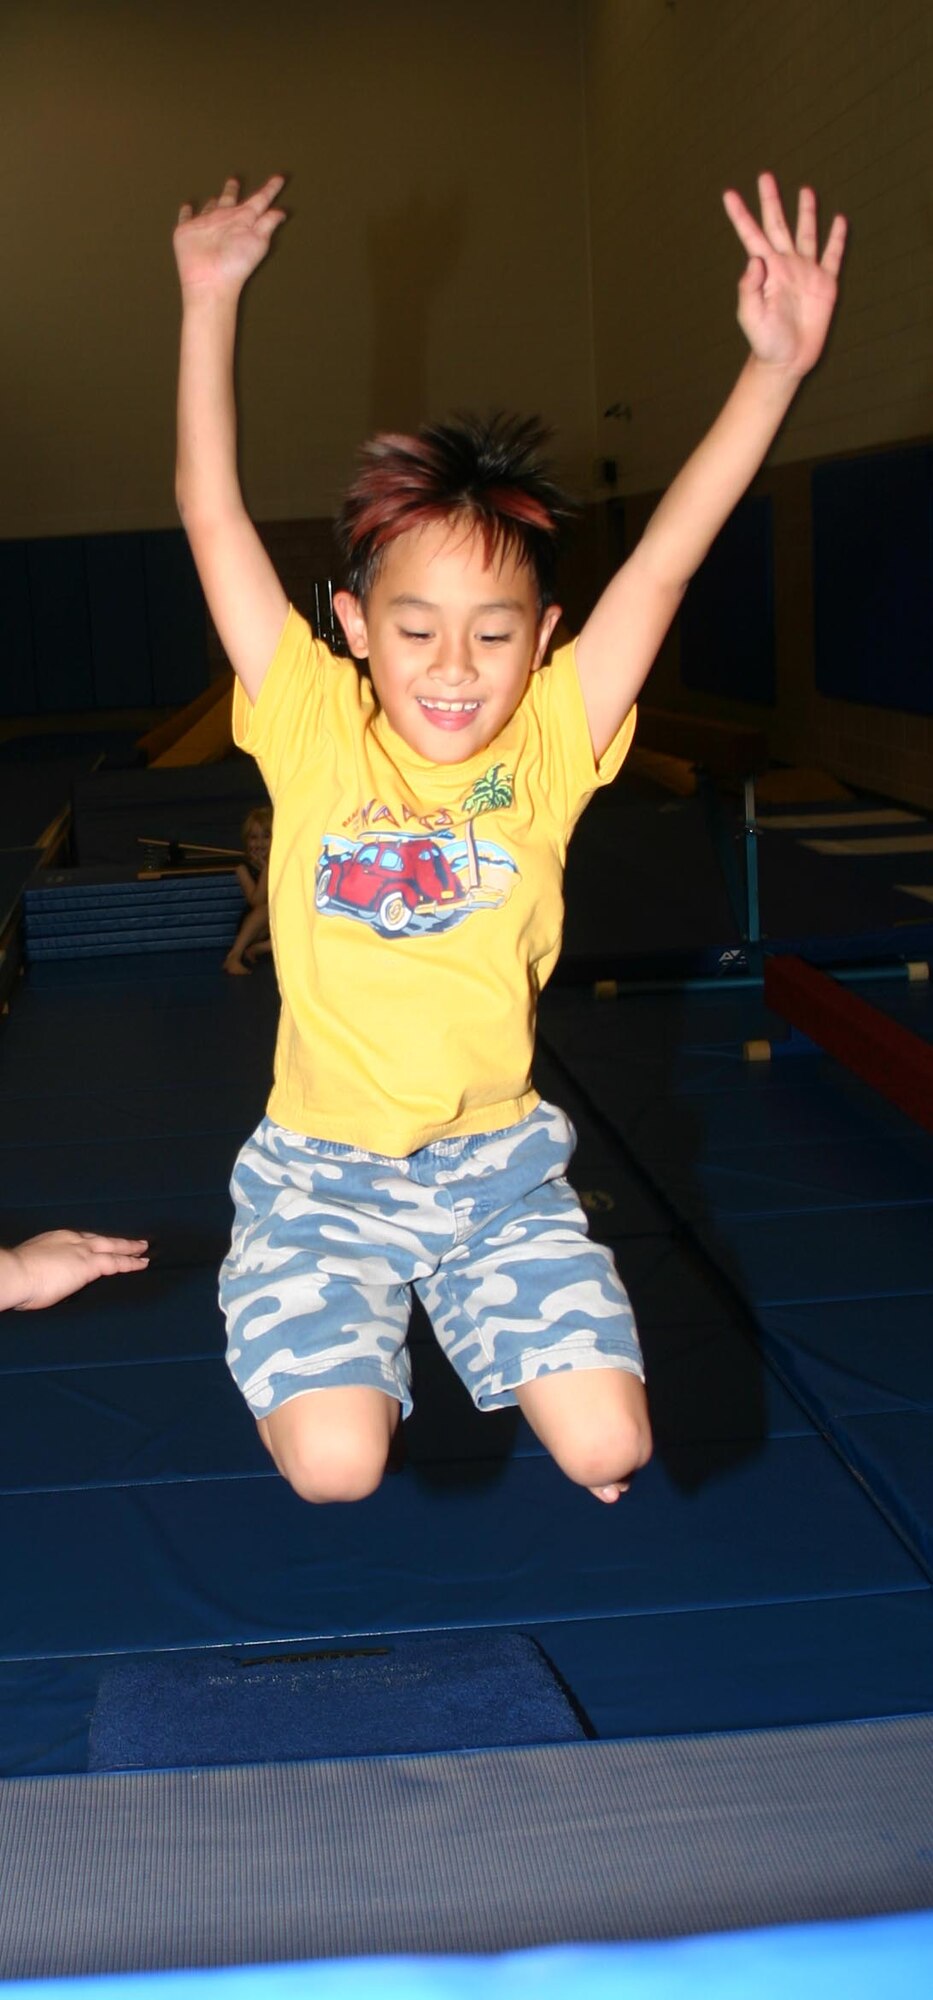 Shane Donovan jumps while participating in the KinderGym class at the Madrigal Youth Center. (U.S. Air Force photo/Senior Airman Jacque Lickteig).